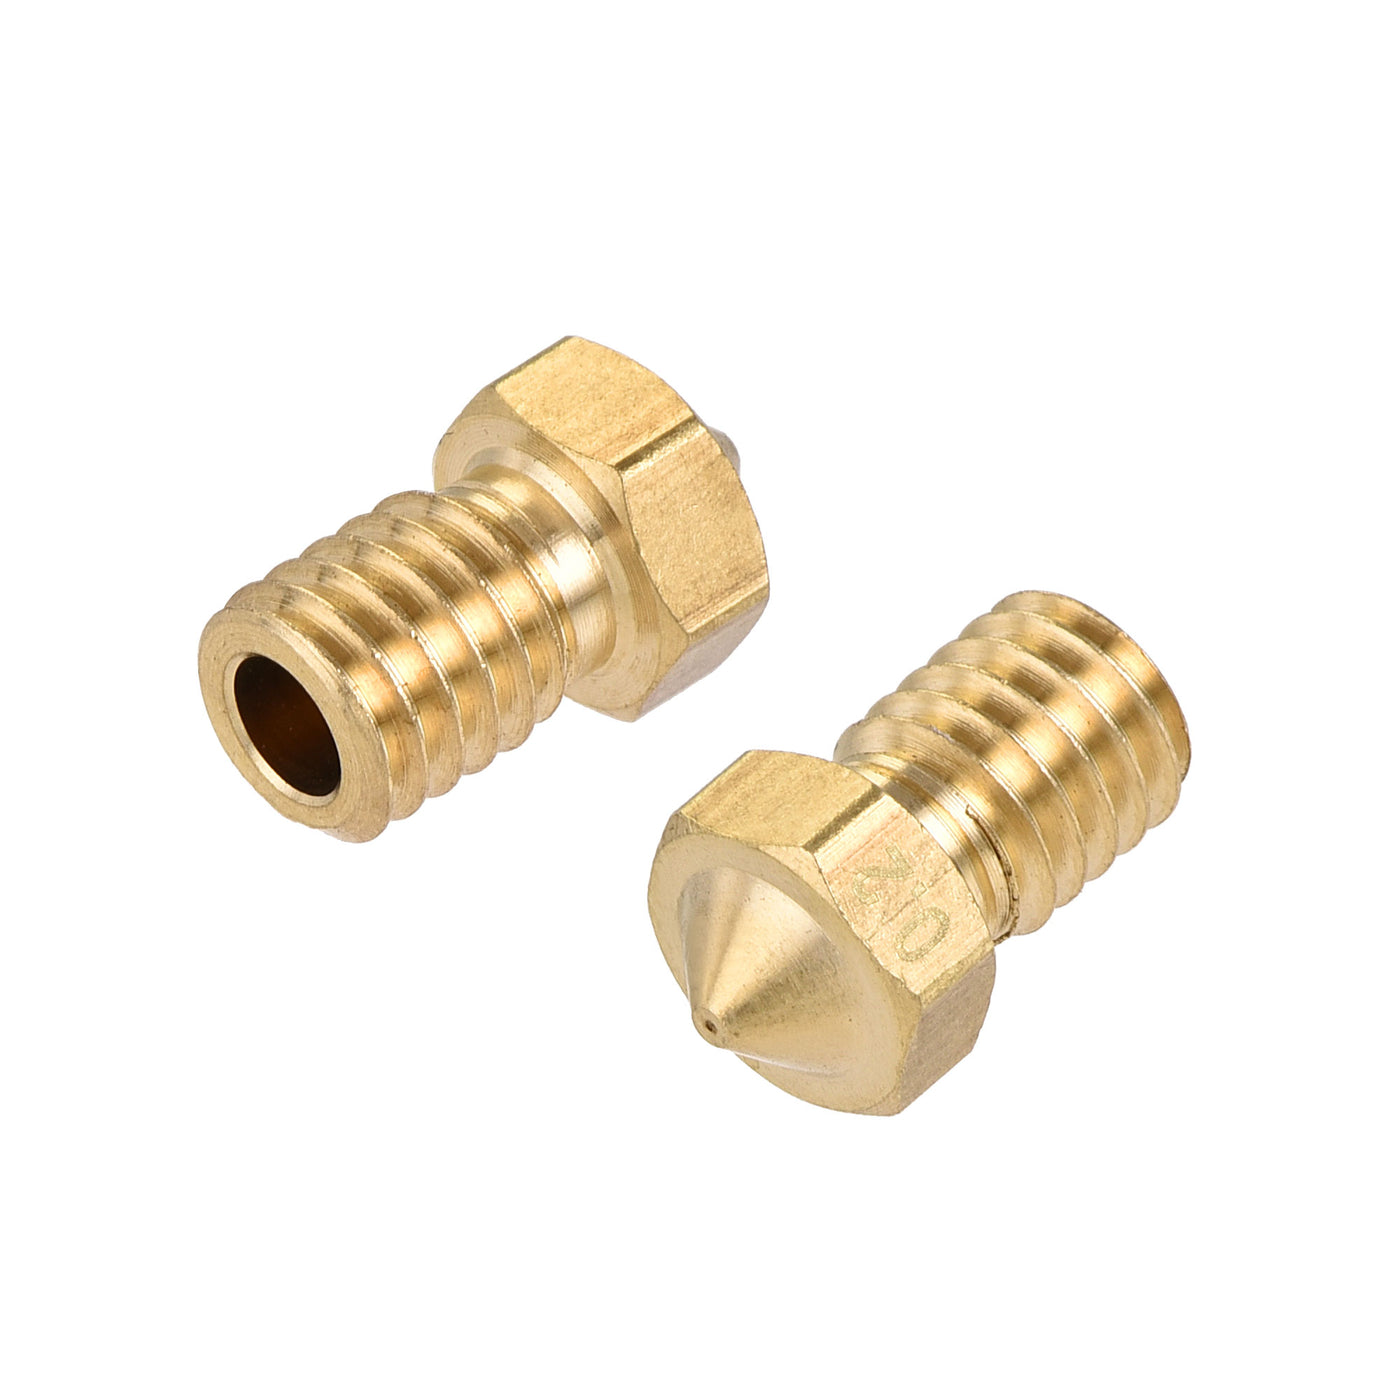 uxcell Uxcell 0.2mm 3D Printer Nozzle, 14pcs M6 Thread for V5 V6 3mm Extruder Print, Brass